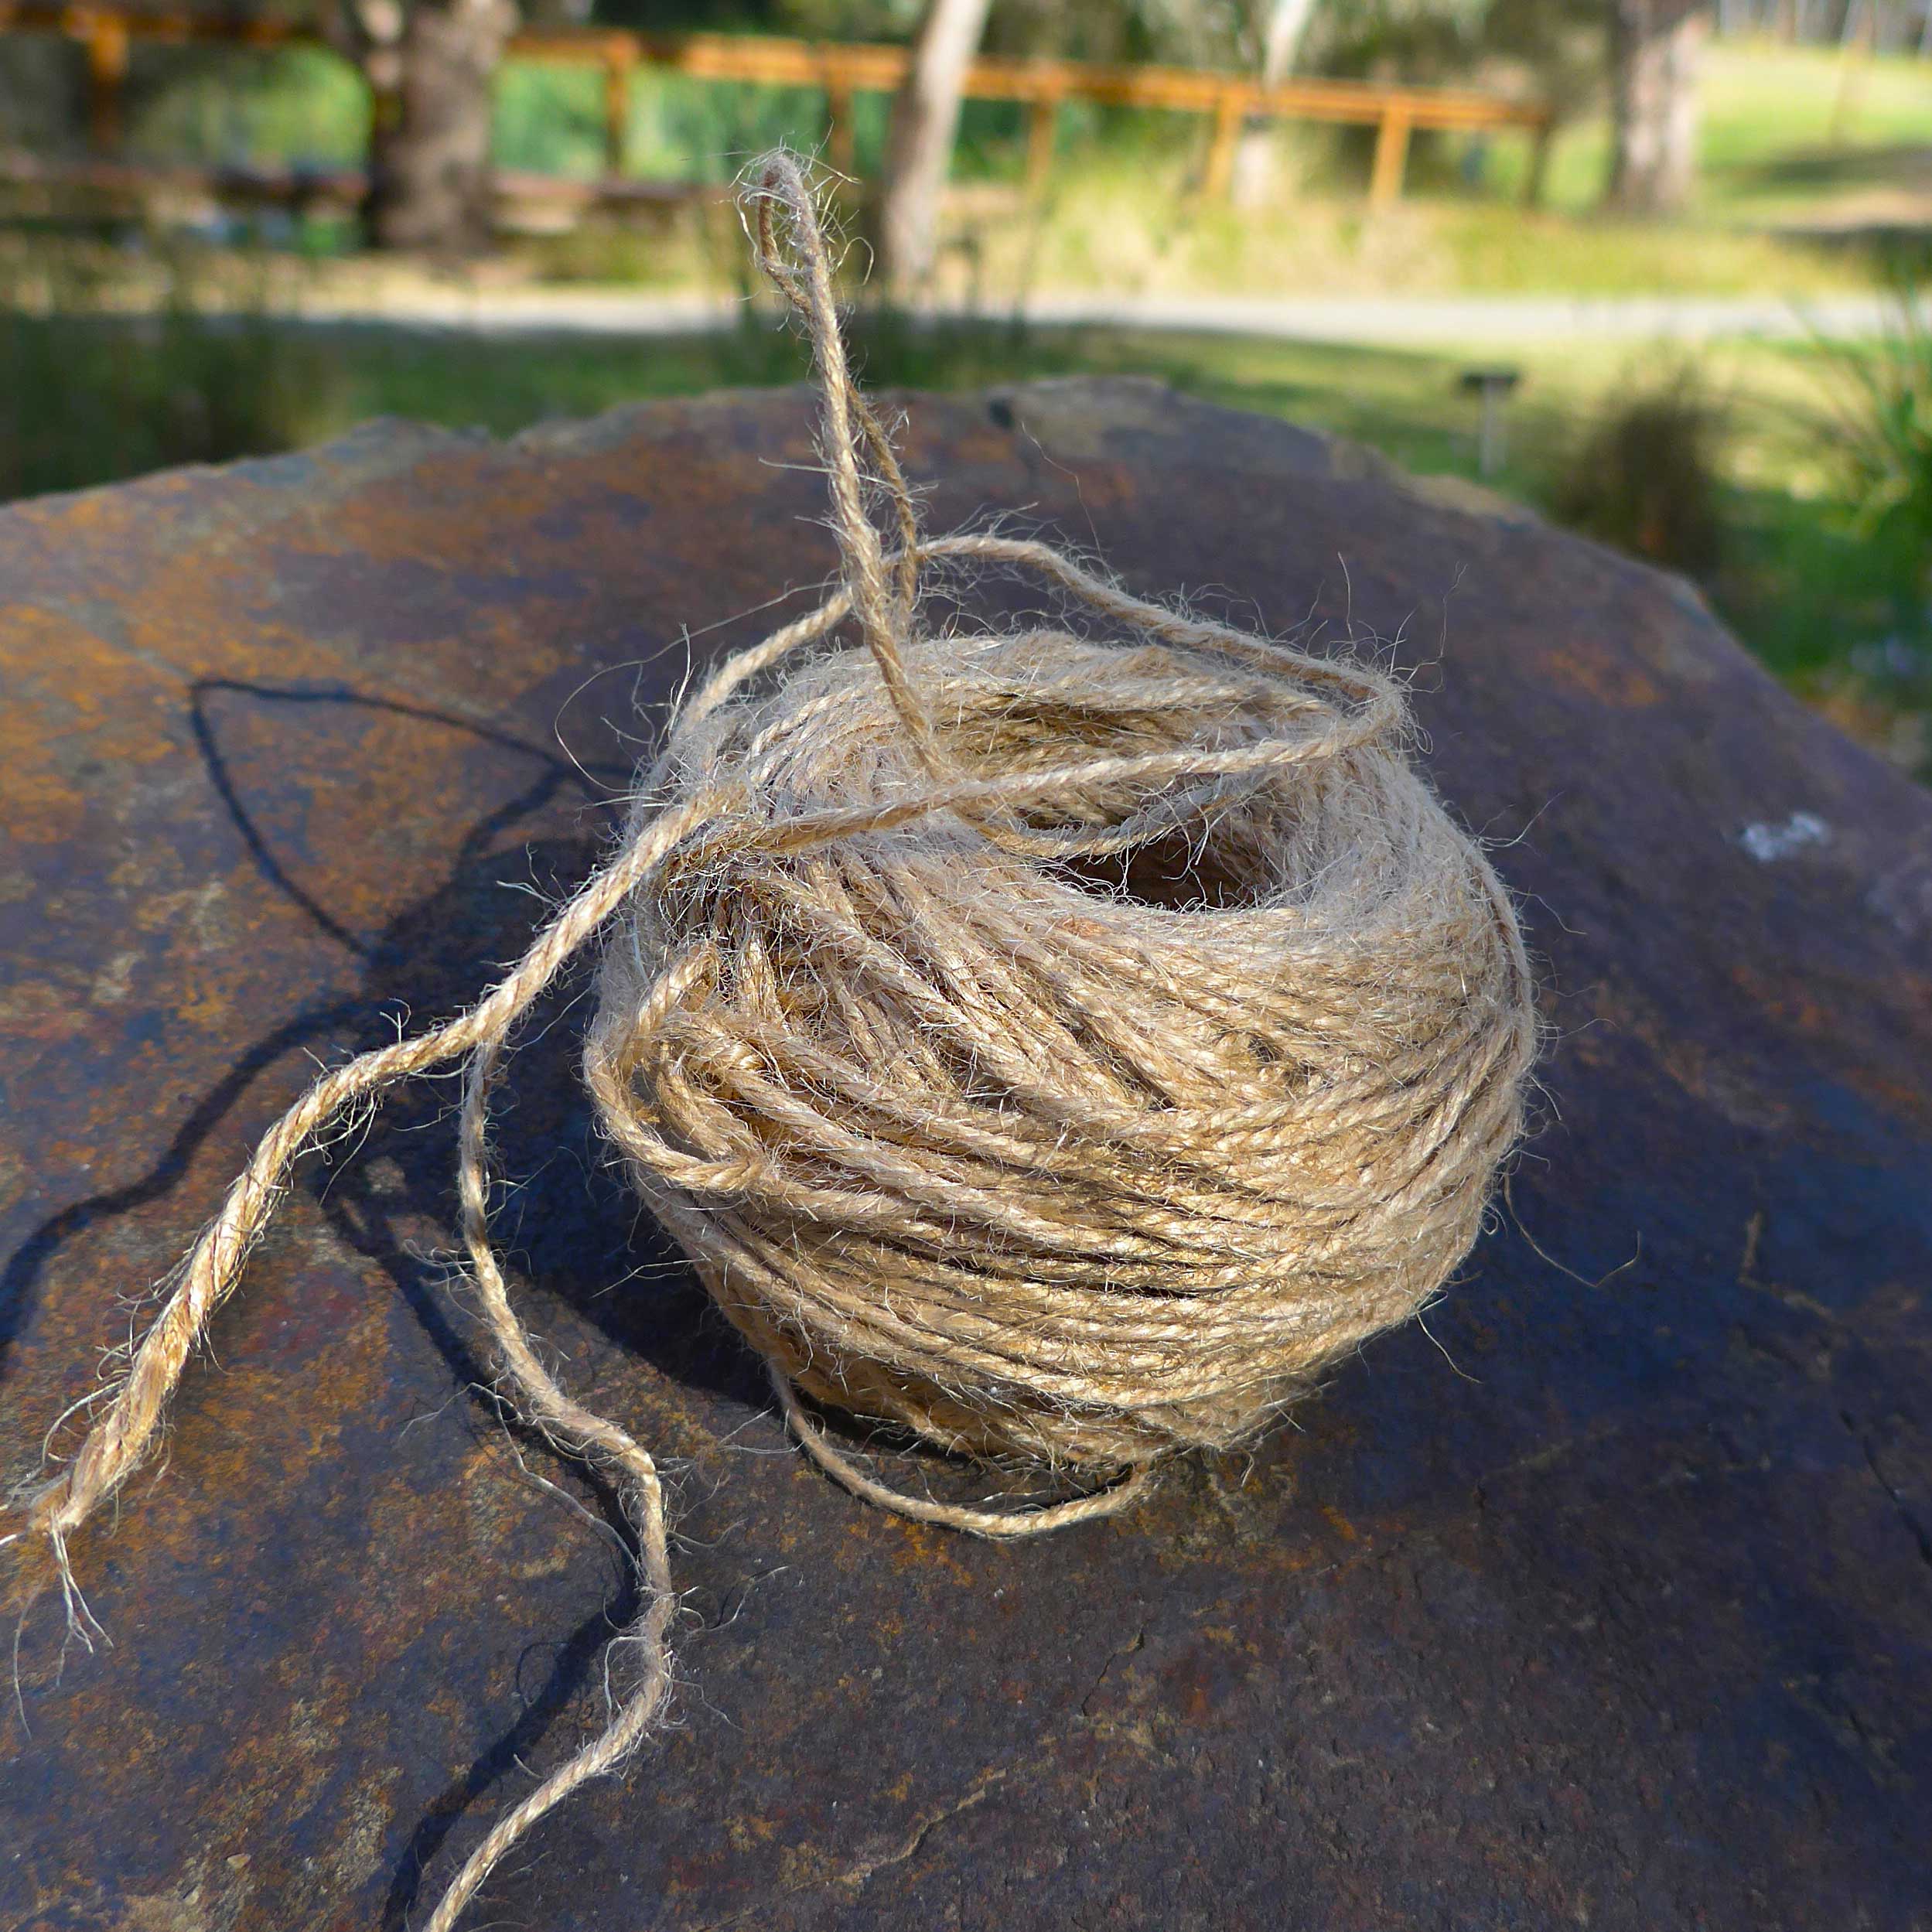 A ball of rope